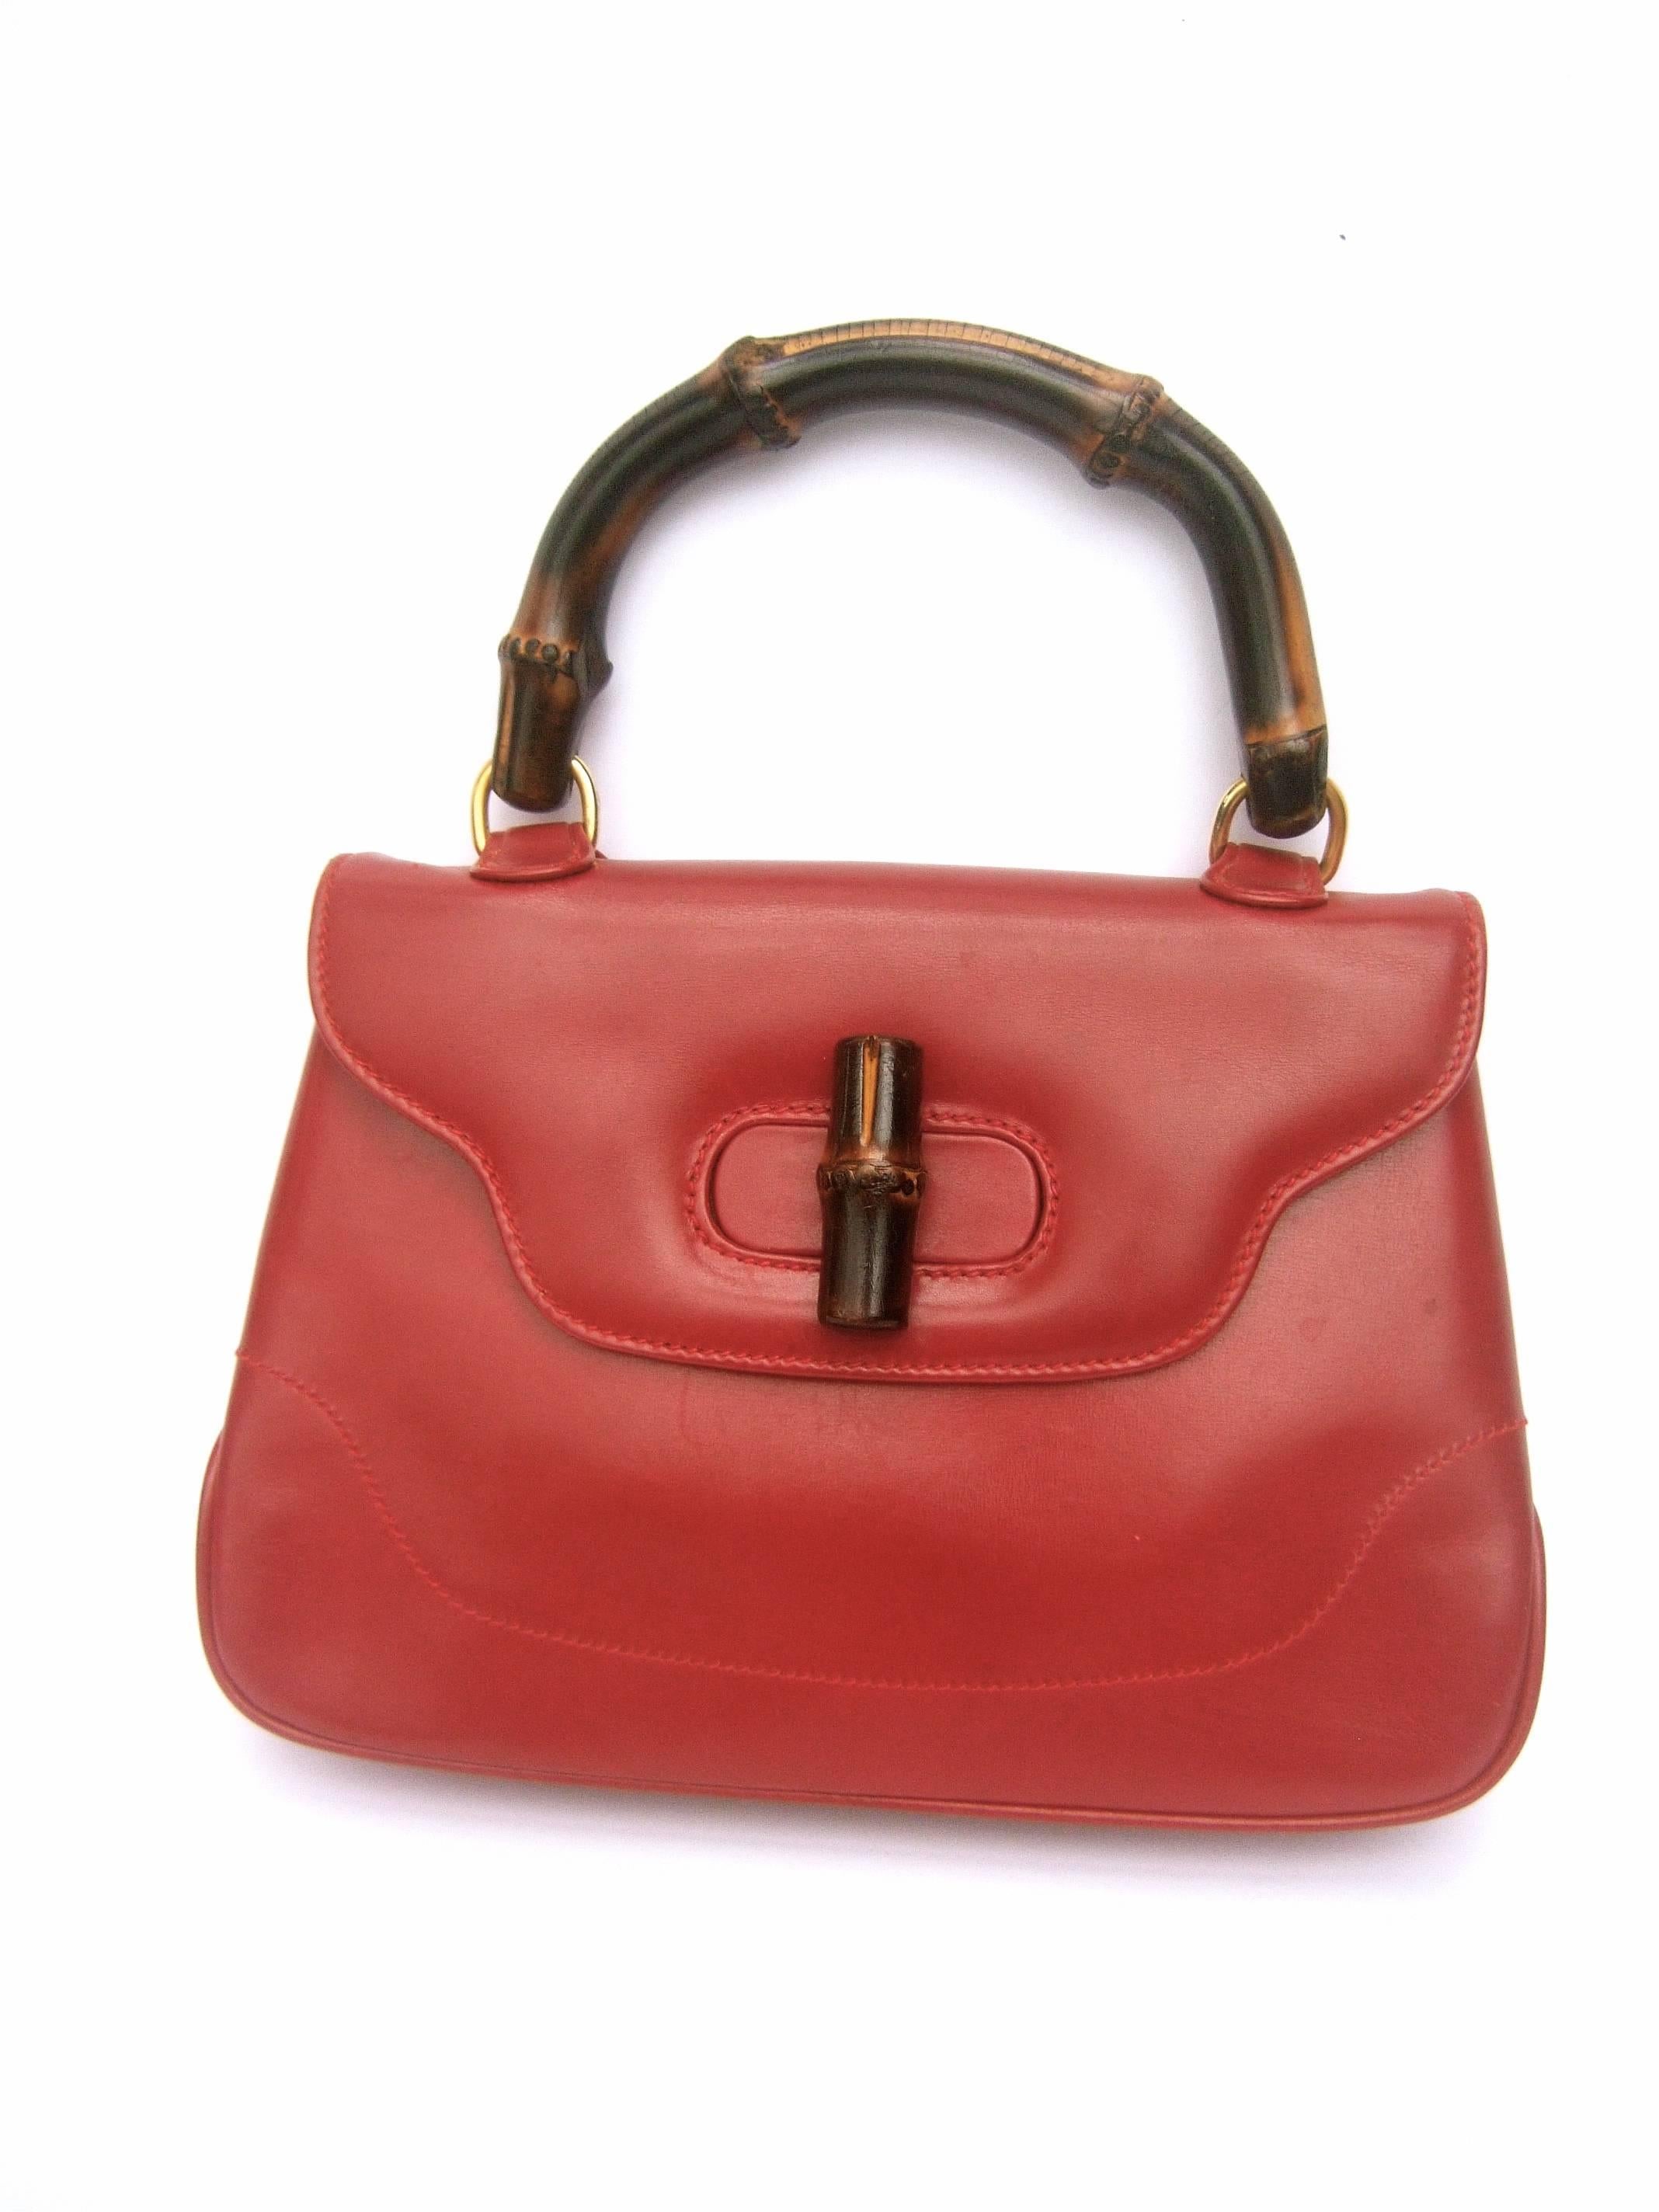 Gucci Italy Iconic cherry red leather bamboo handbag in box c 1970
The classic Gucci handbag is designed with their
signature bamboo wood handle and matching toggle
clasp. The swiveling wood handle is anchored with 
a pair of gilt metal jump rings